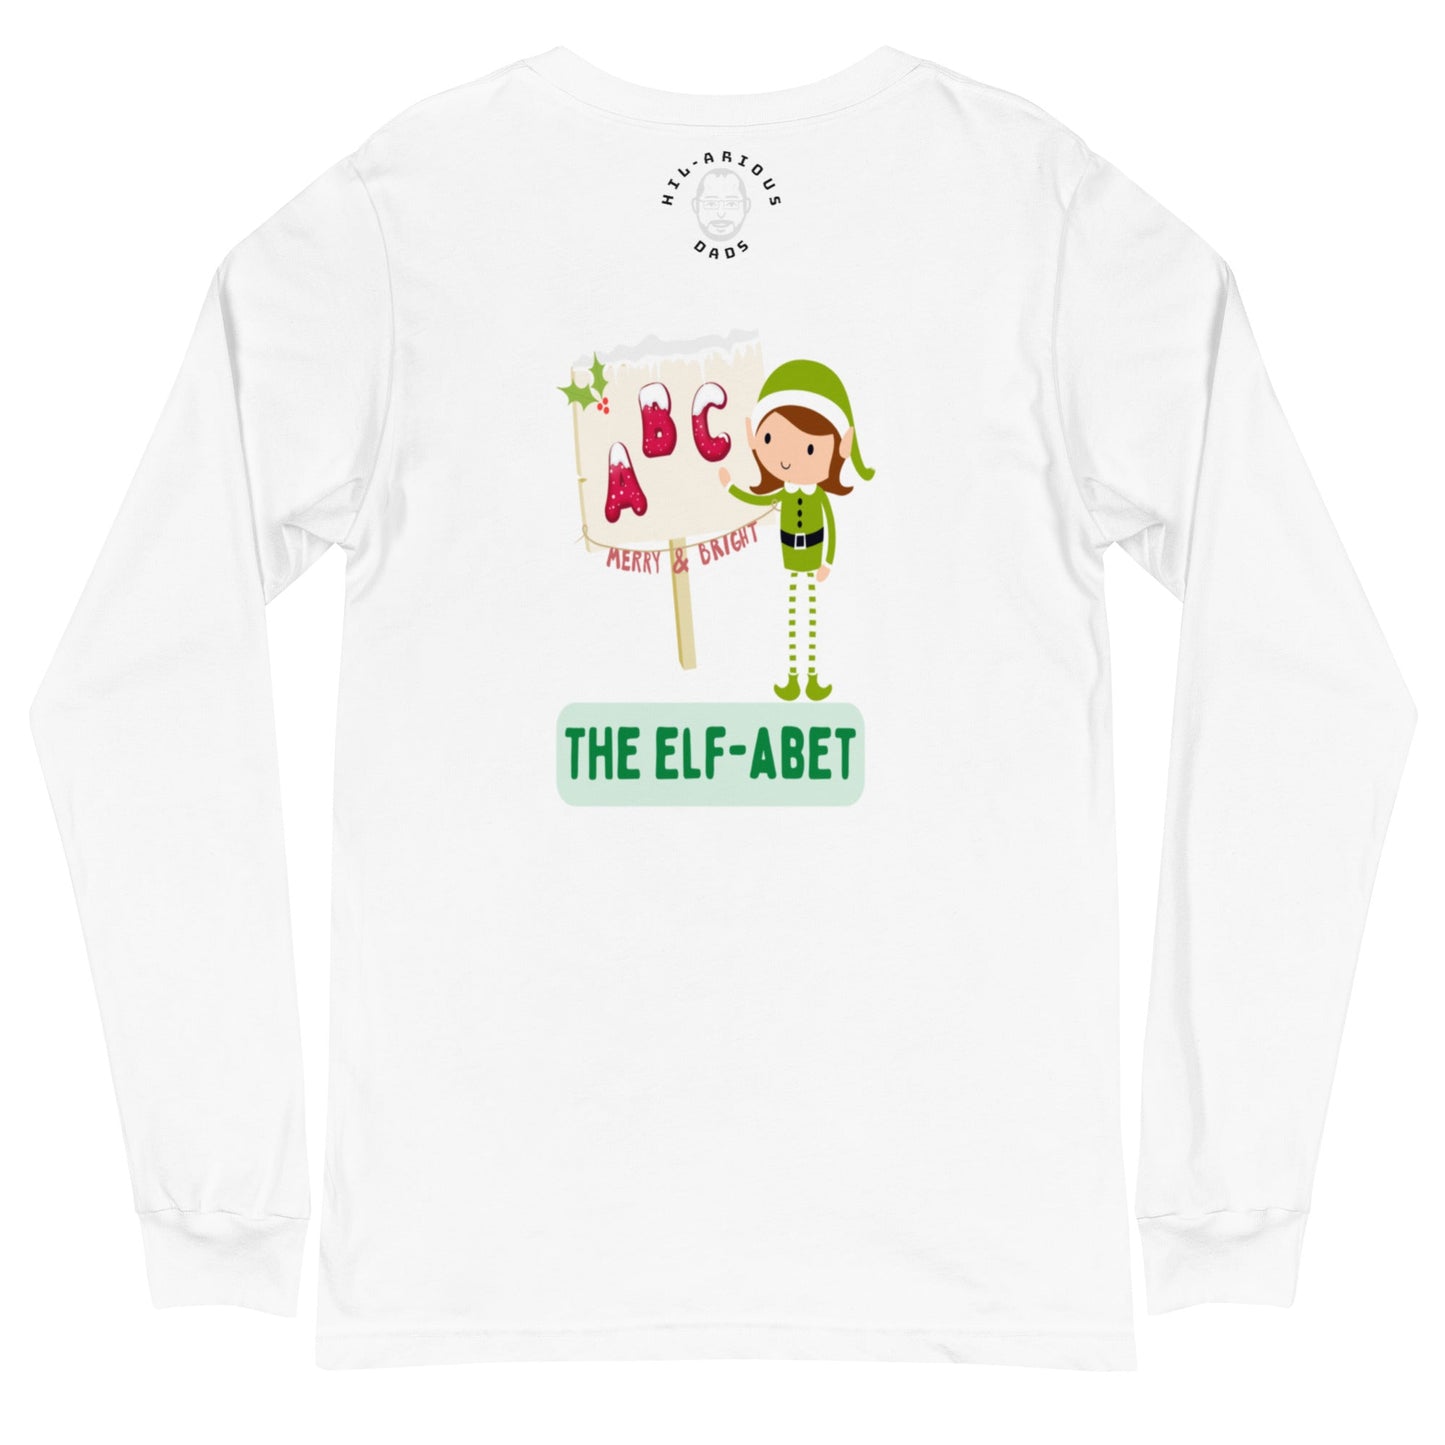 What do Santa’s little helpers learn at school?-Long Sleeve Tee - Hil-arious Dads